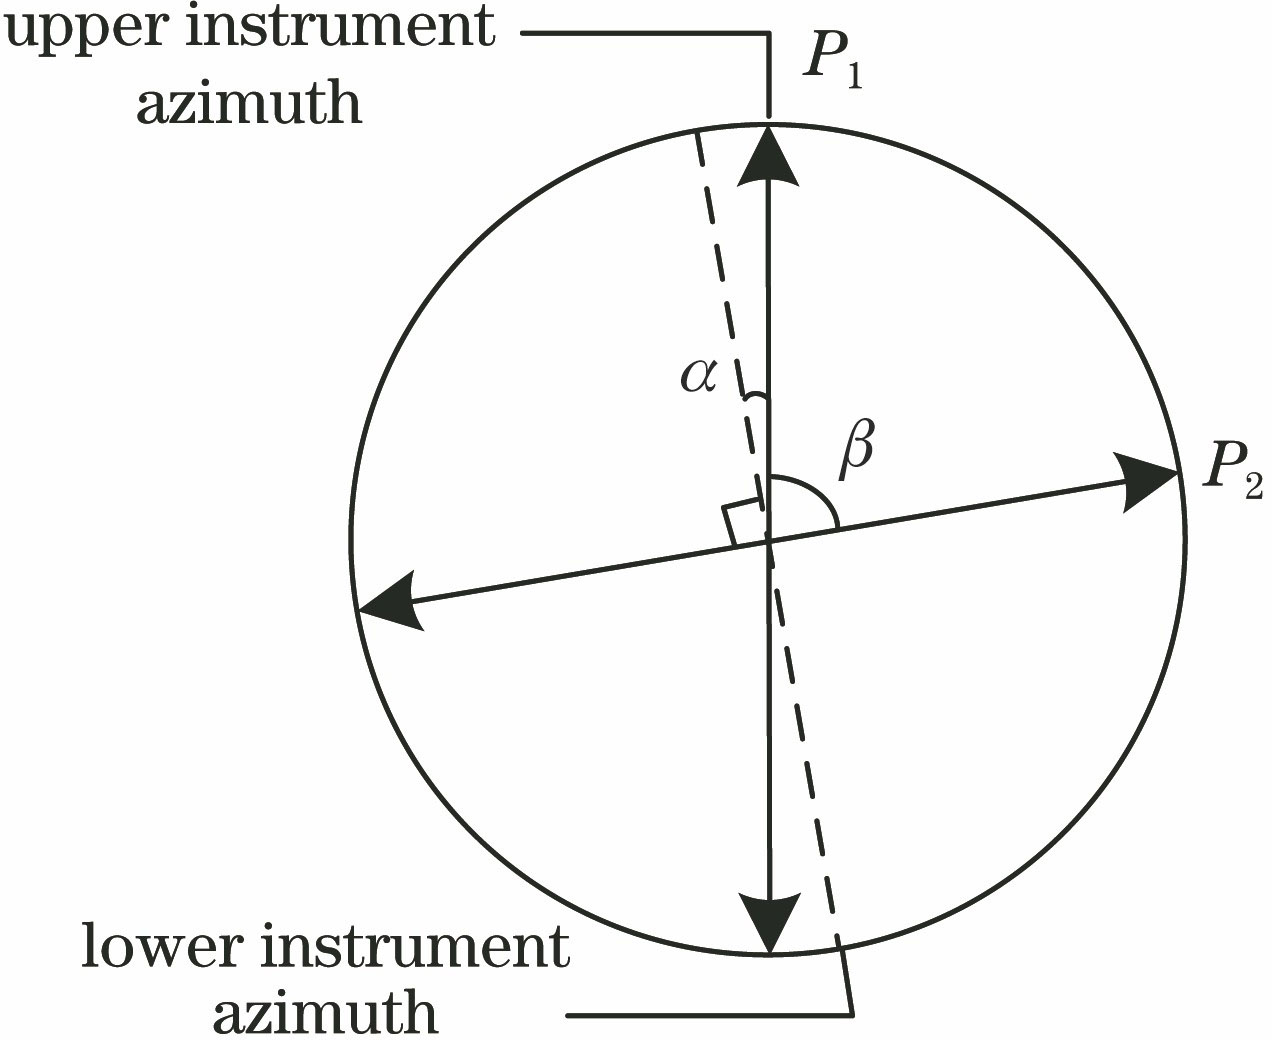 Principle of azimuth detection